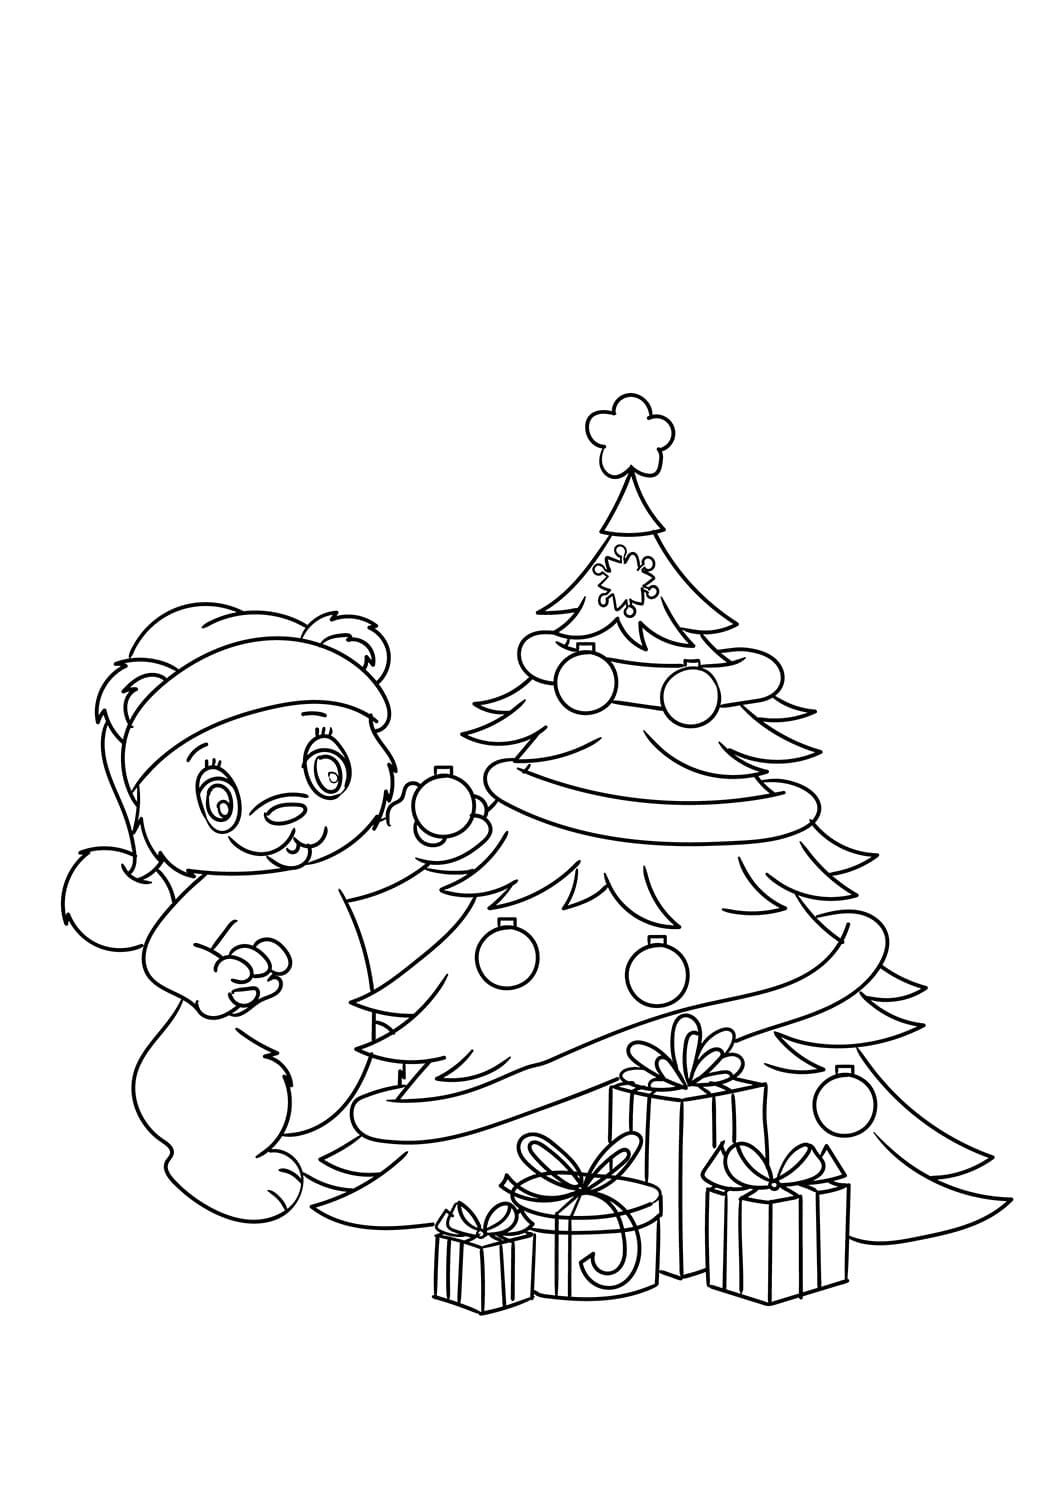 Teddy Decorating Christmas Tree Image For Kids Coloring Page